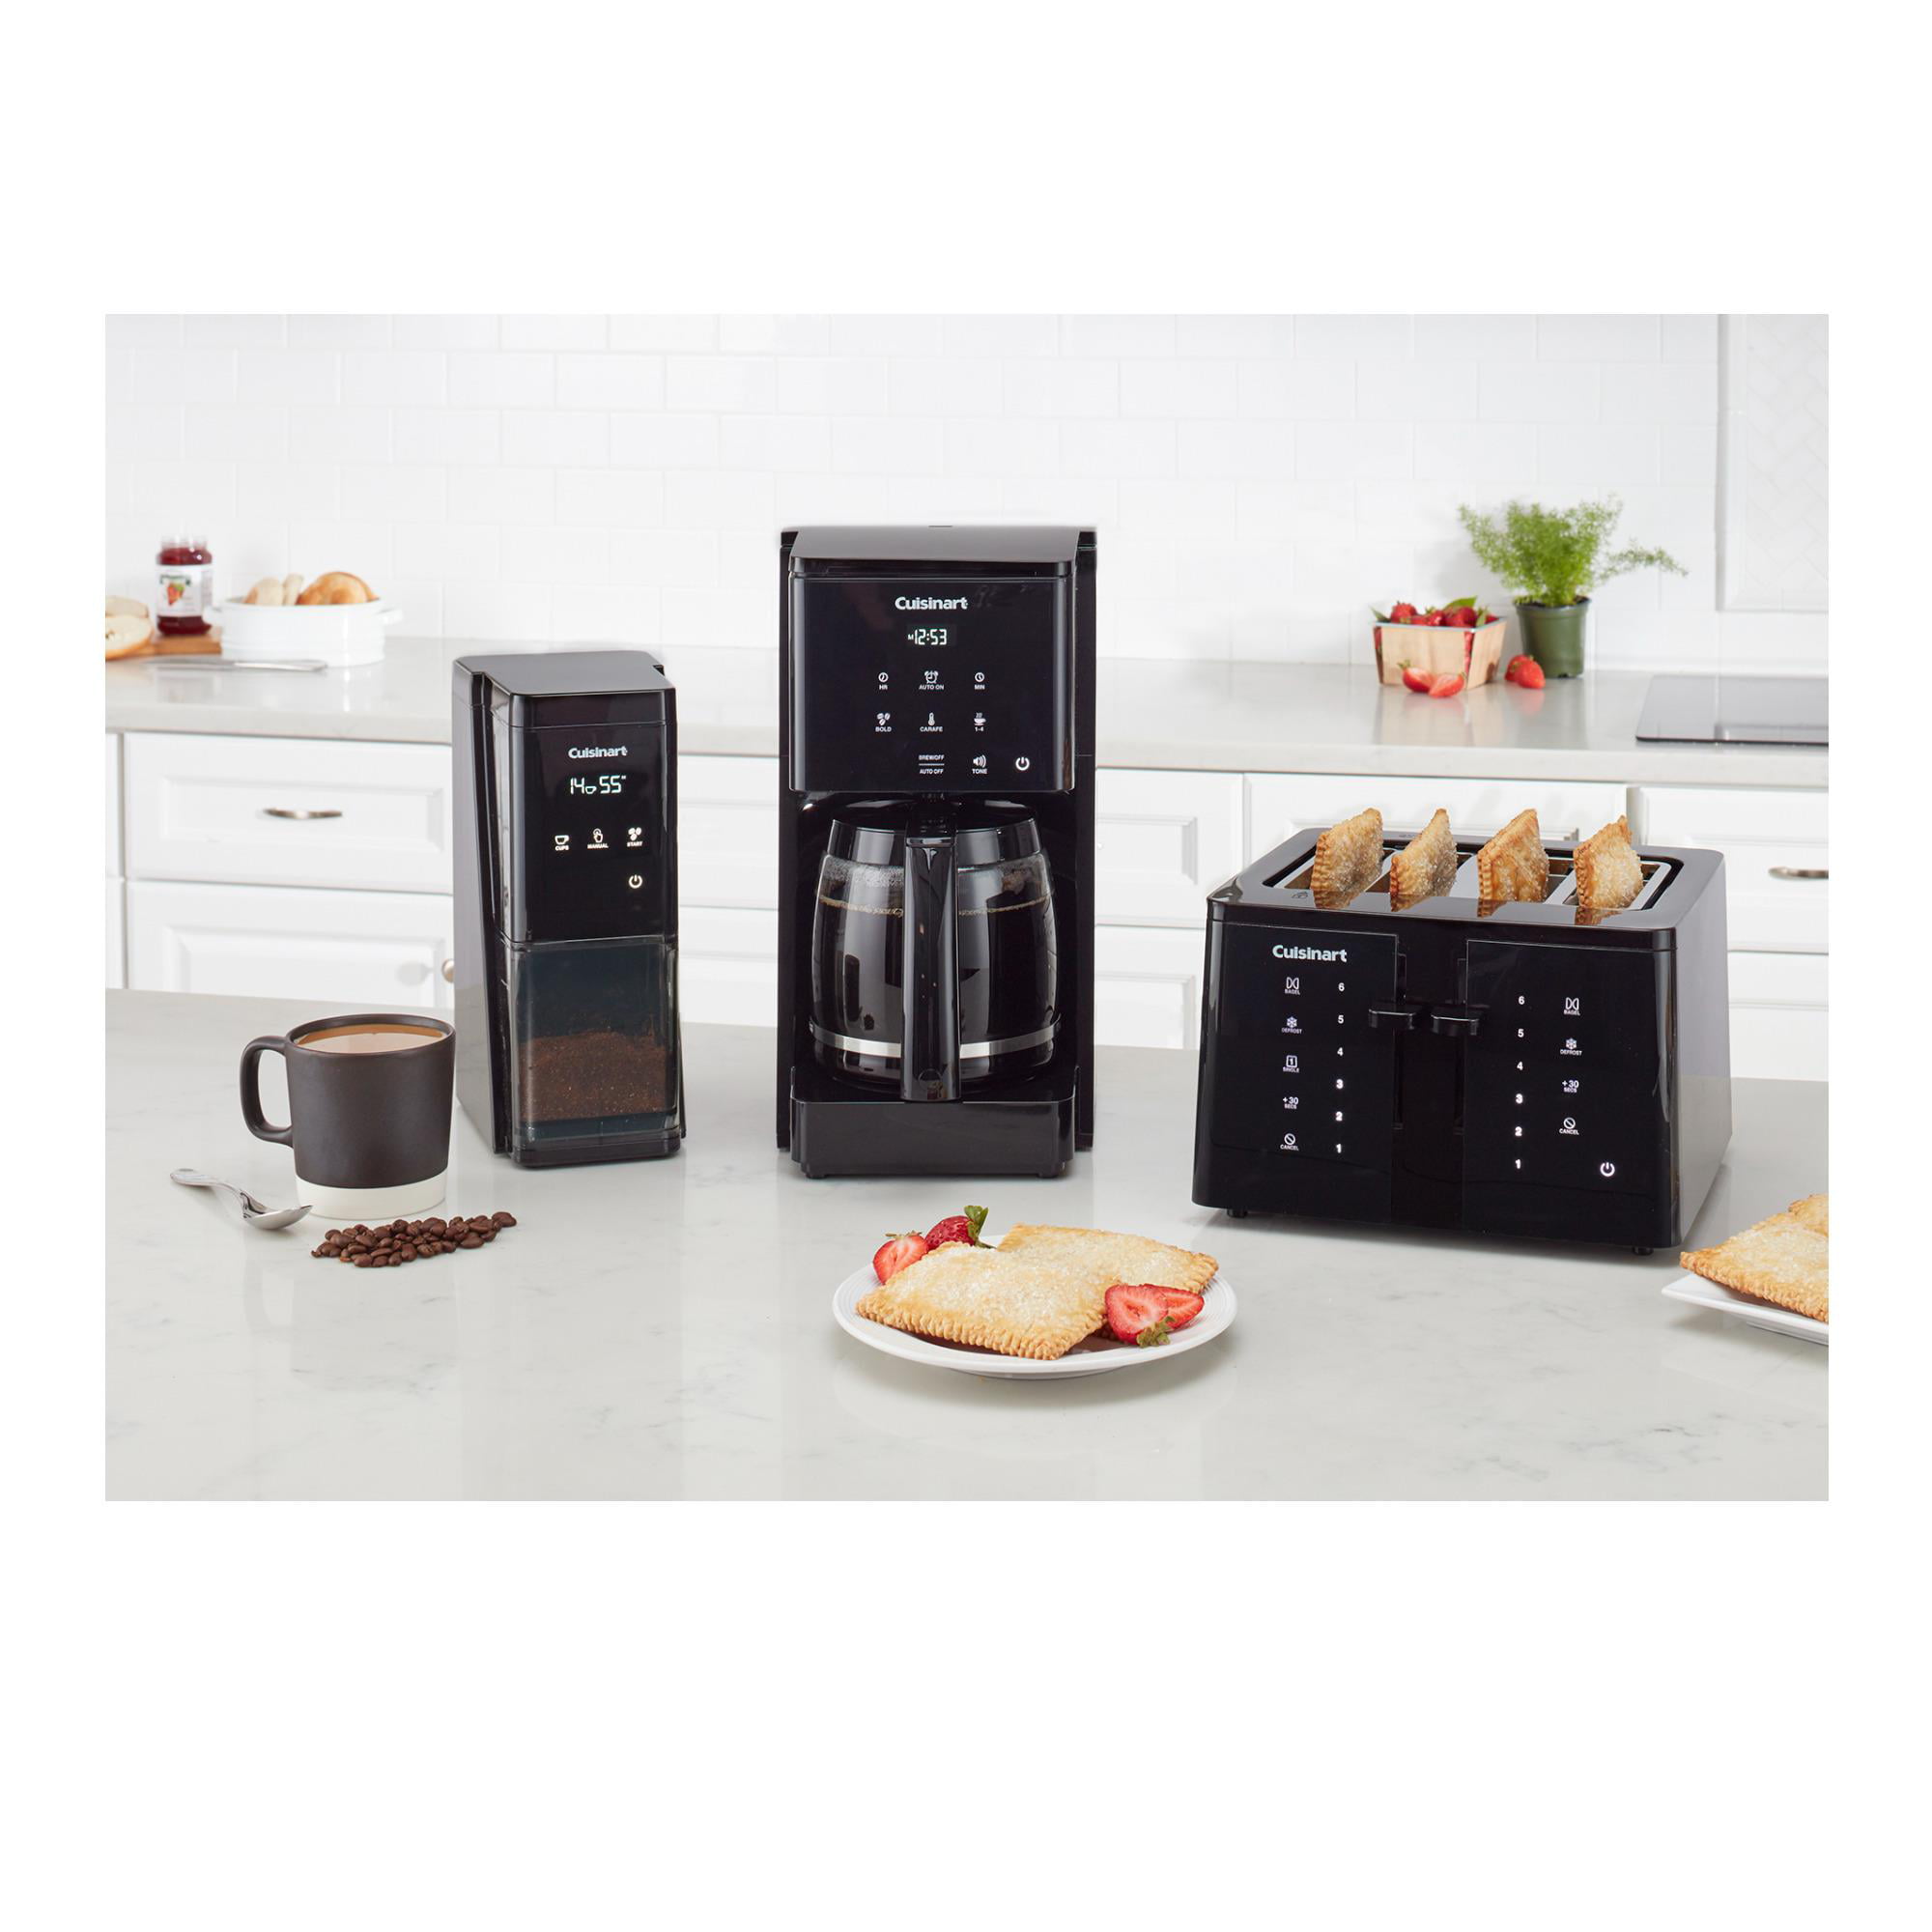  Touchscreen Coffee Maker, 14-Cup Programmable Coffee